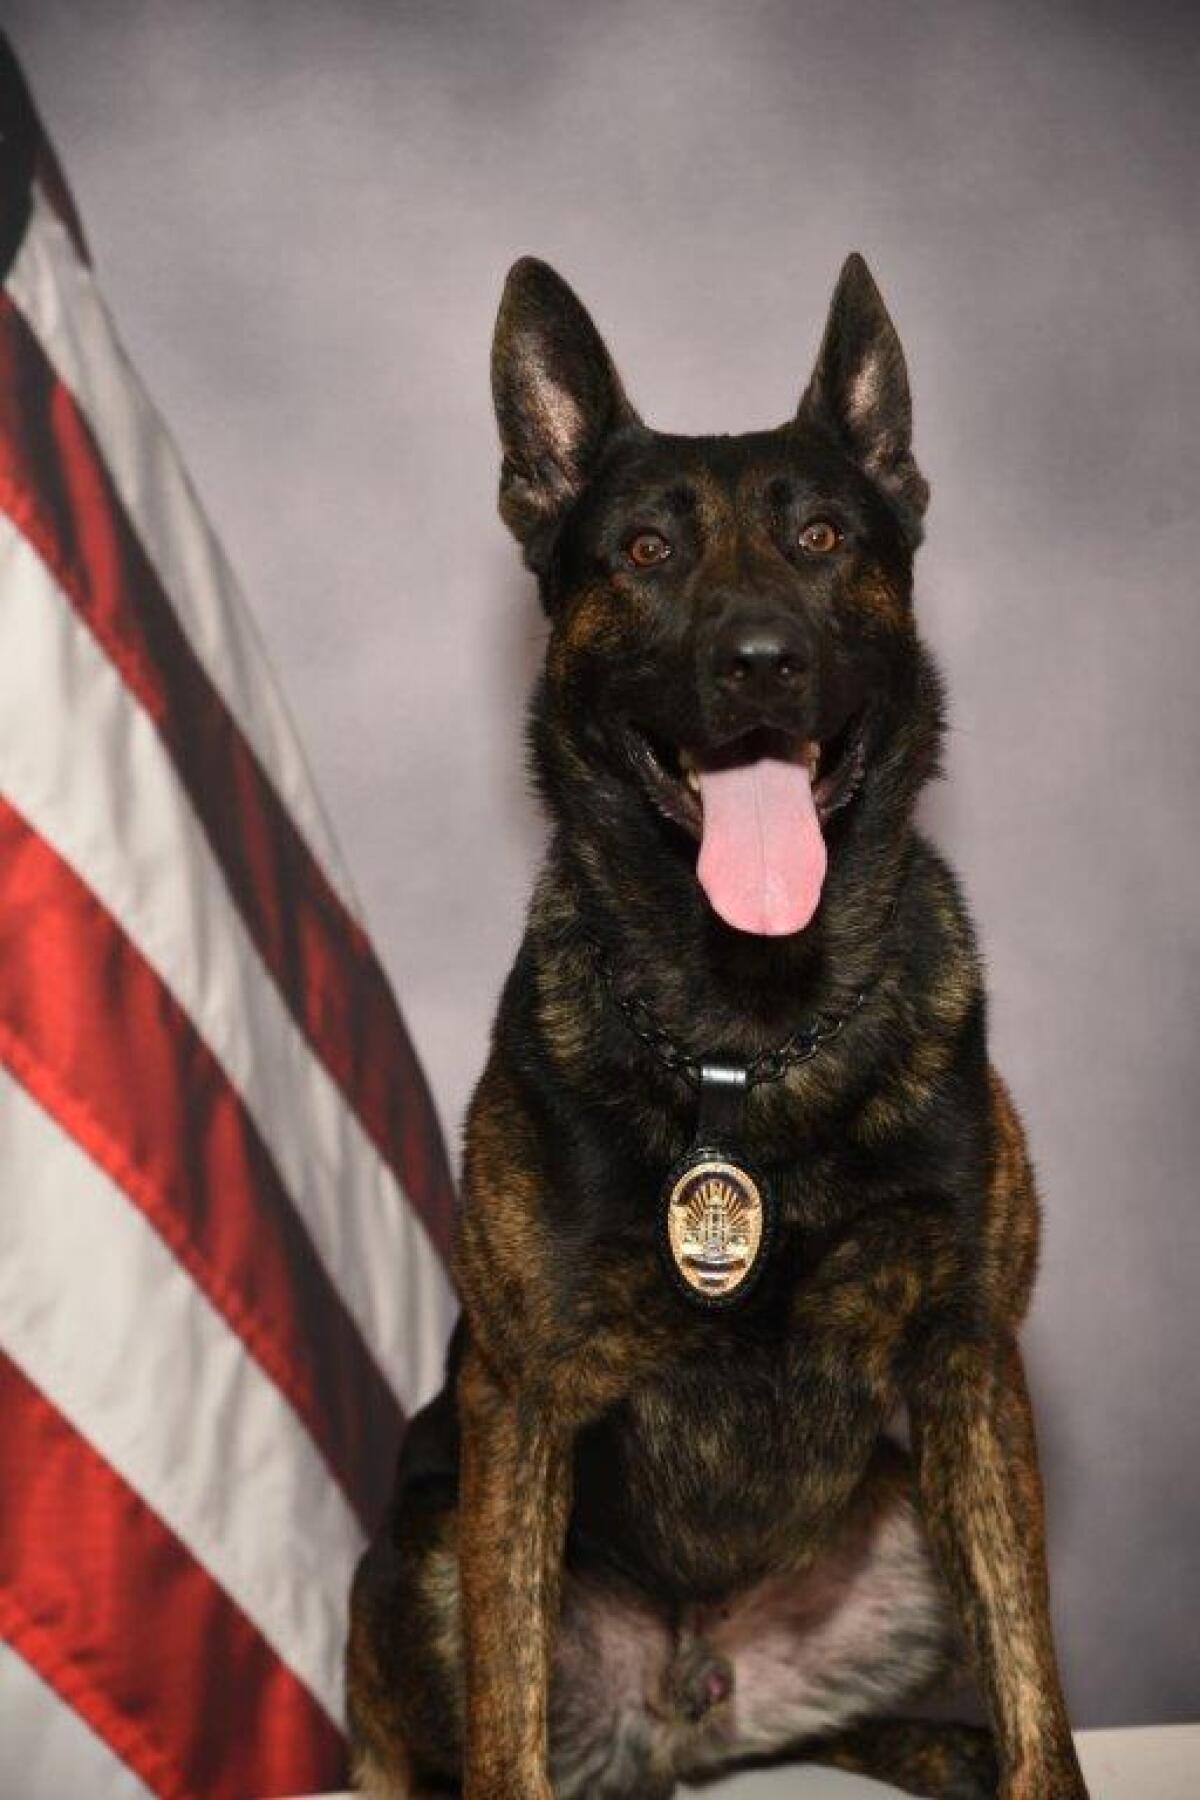 Rex, a police dog in the city of Pasadena, was injured by a burglary suspect, authorities said.